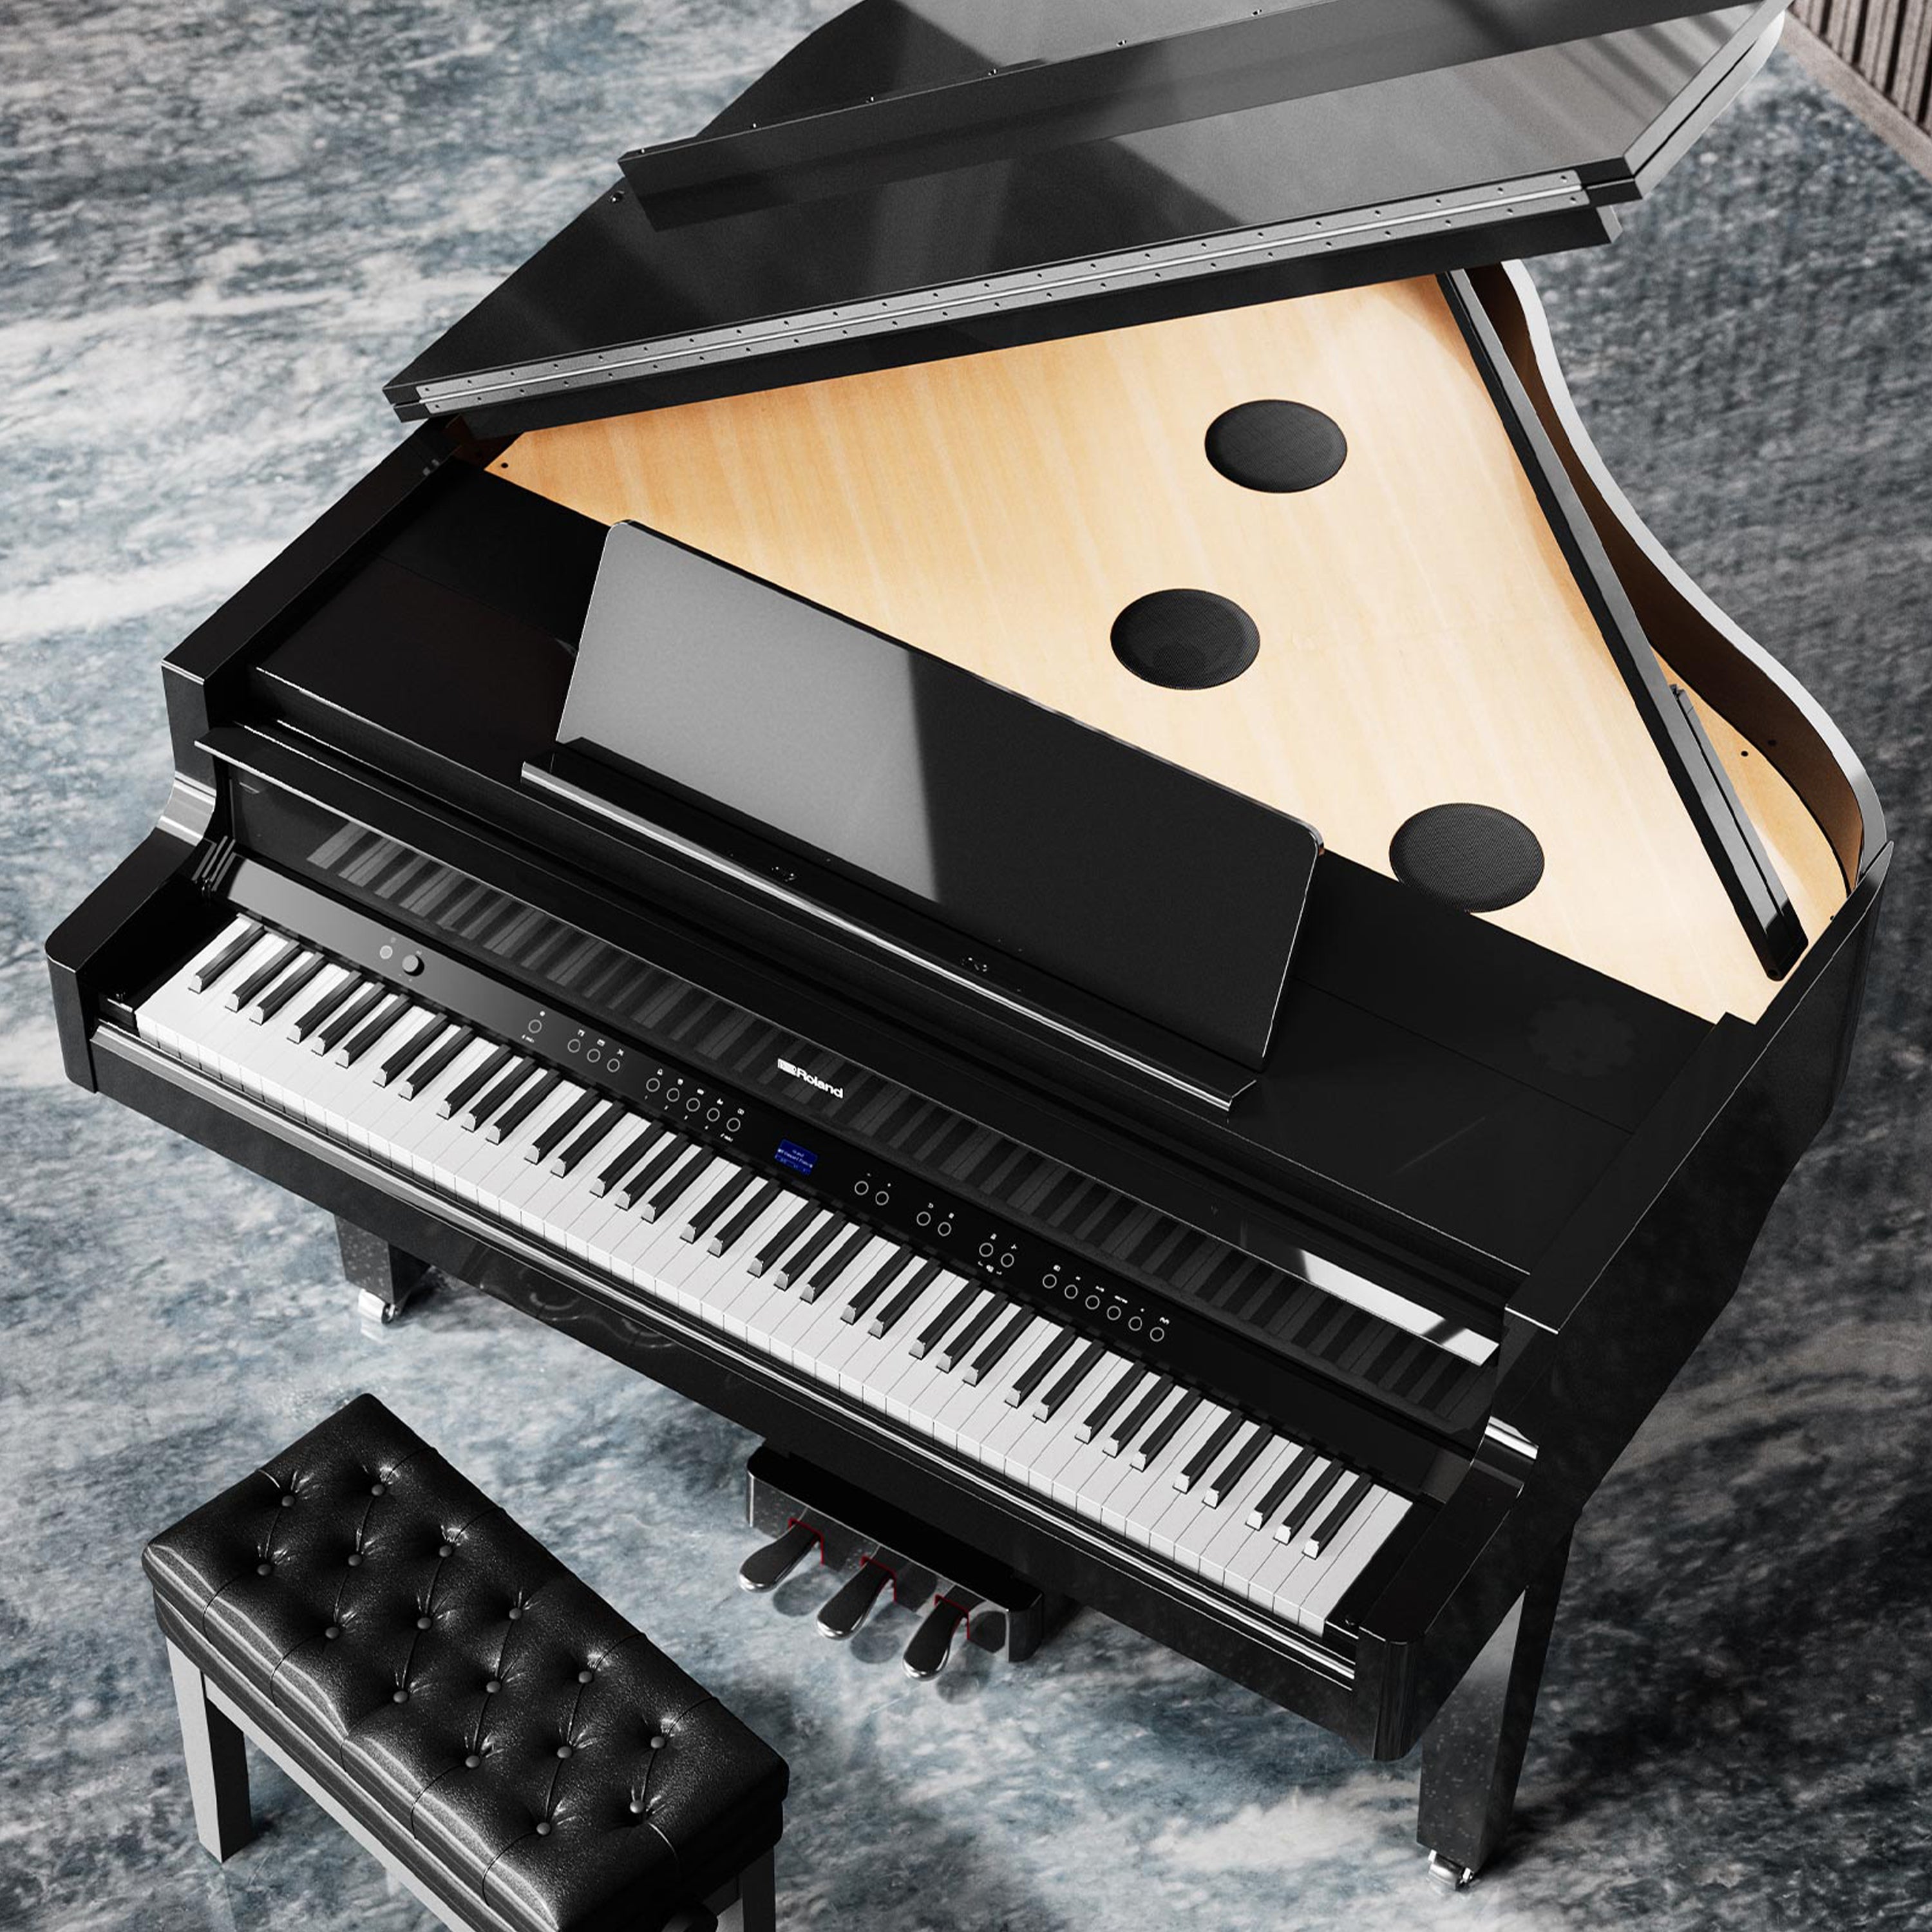 Roland GP-9M Digital Grand Piano with Moving Keys - Polished Ebony - view from above in a stylish room